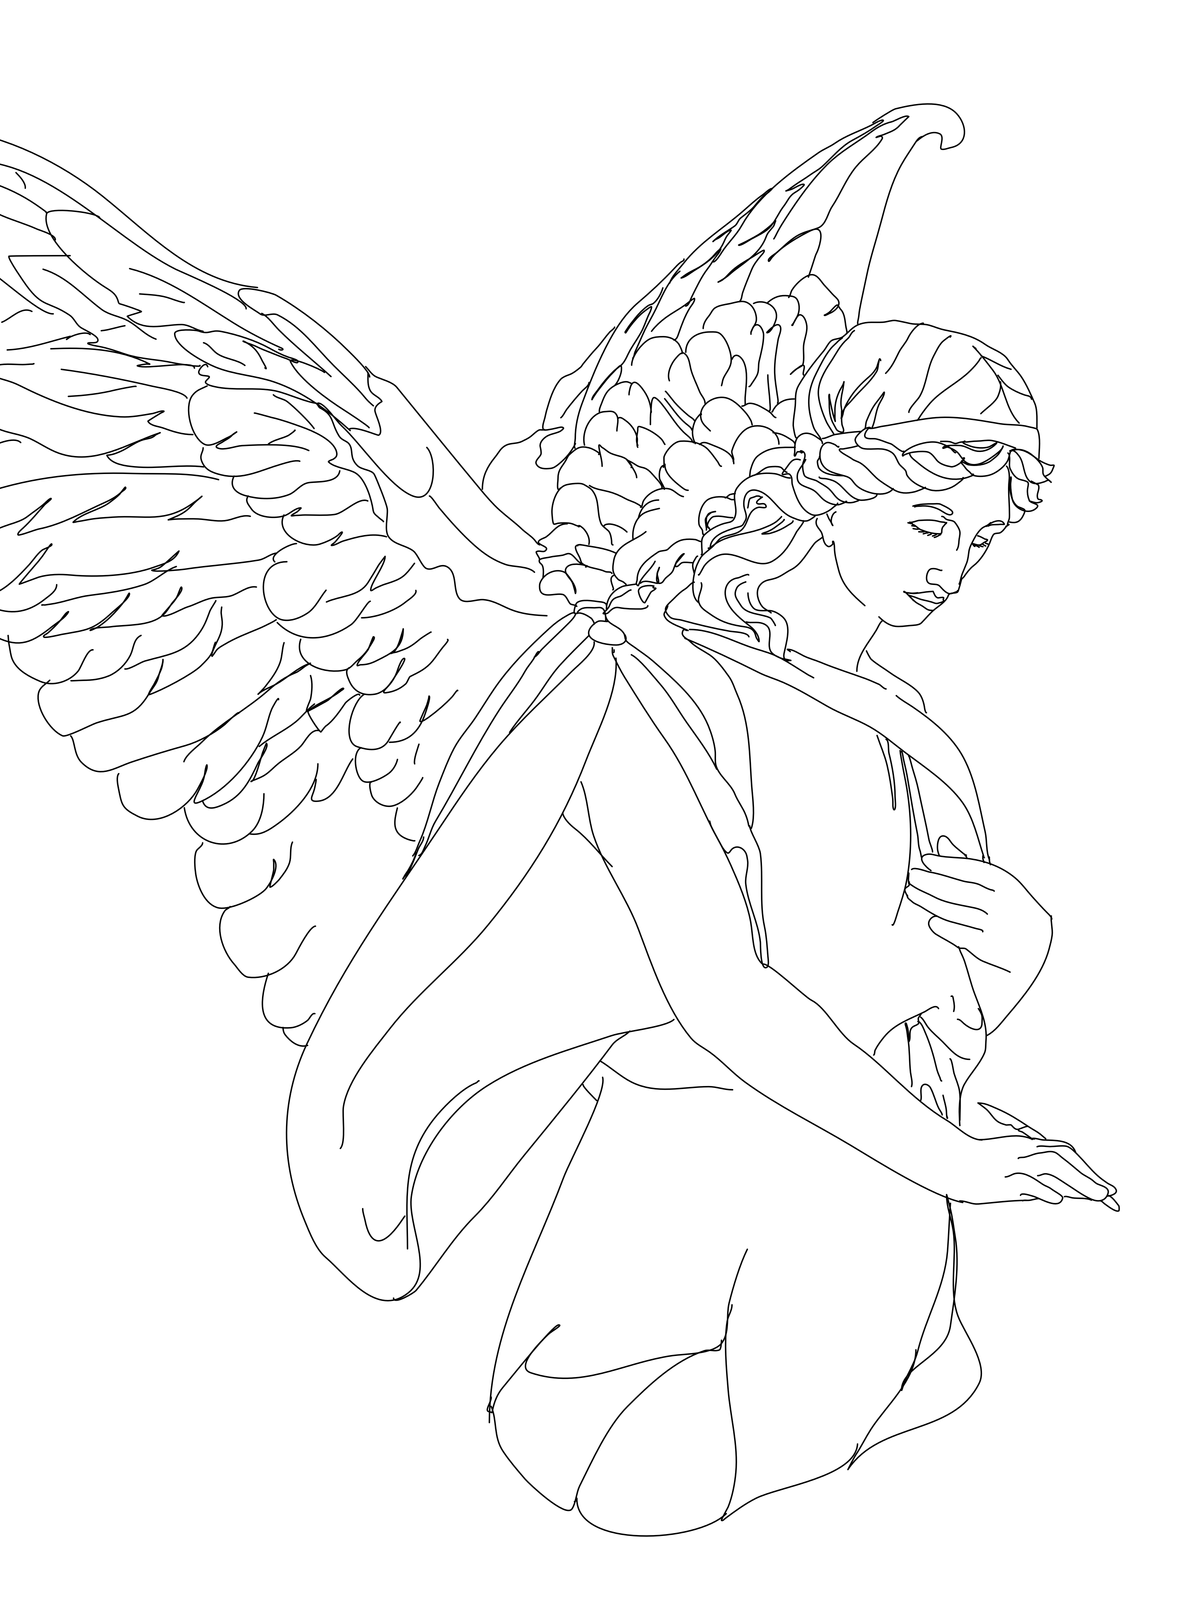 Guardian Angel - Catholic Coloring Page